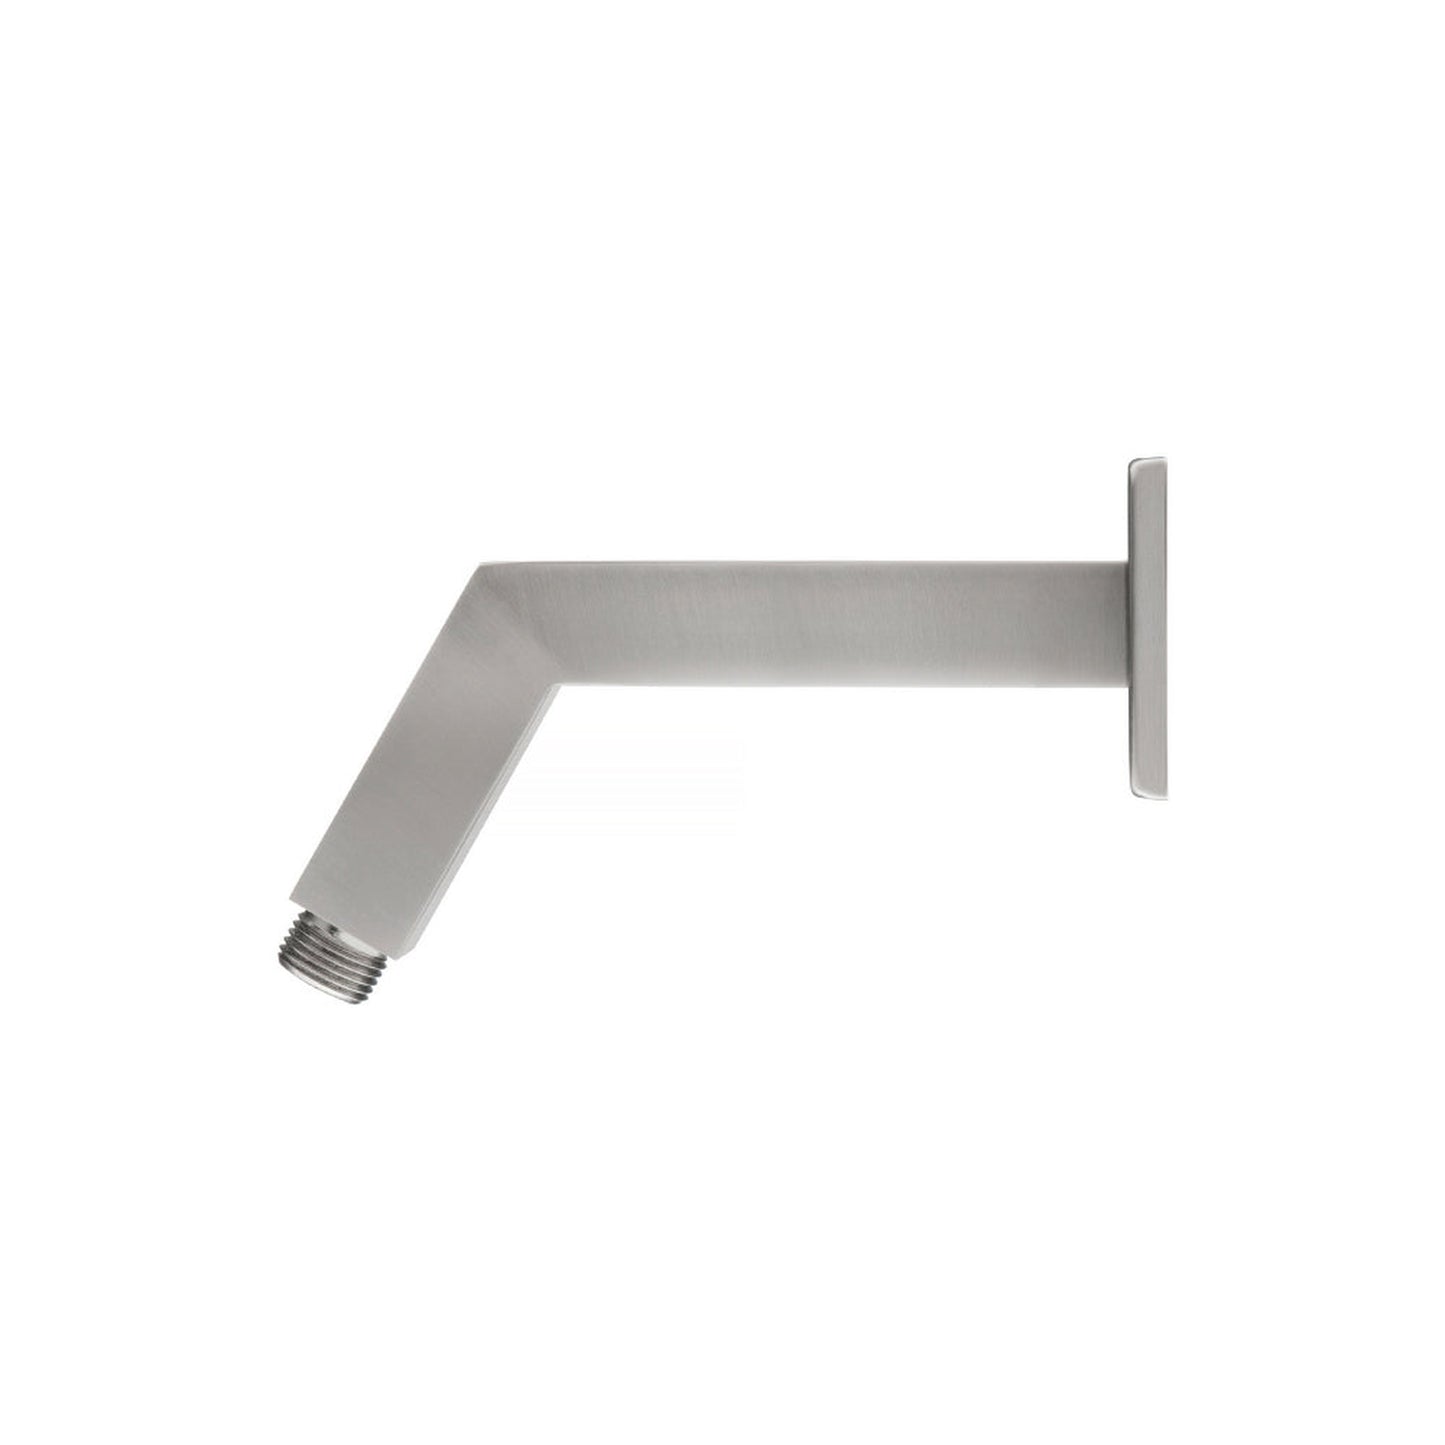 Isenberg Universal Fixtures 7" Polished Nickel PVD Solid Brass Wall-Mounted Standard Shower Arm With Square Sliding Flange